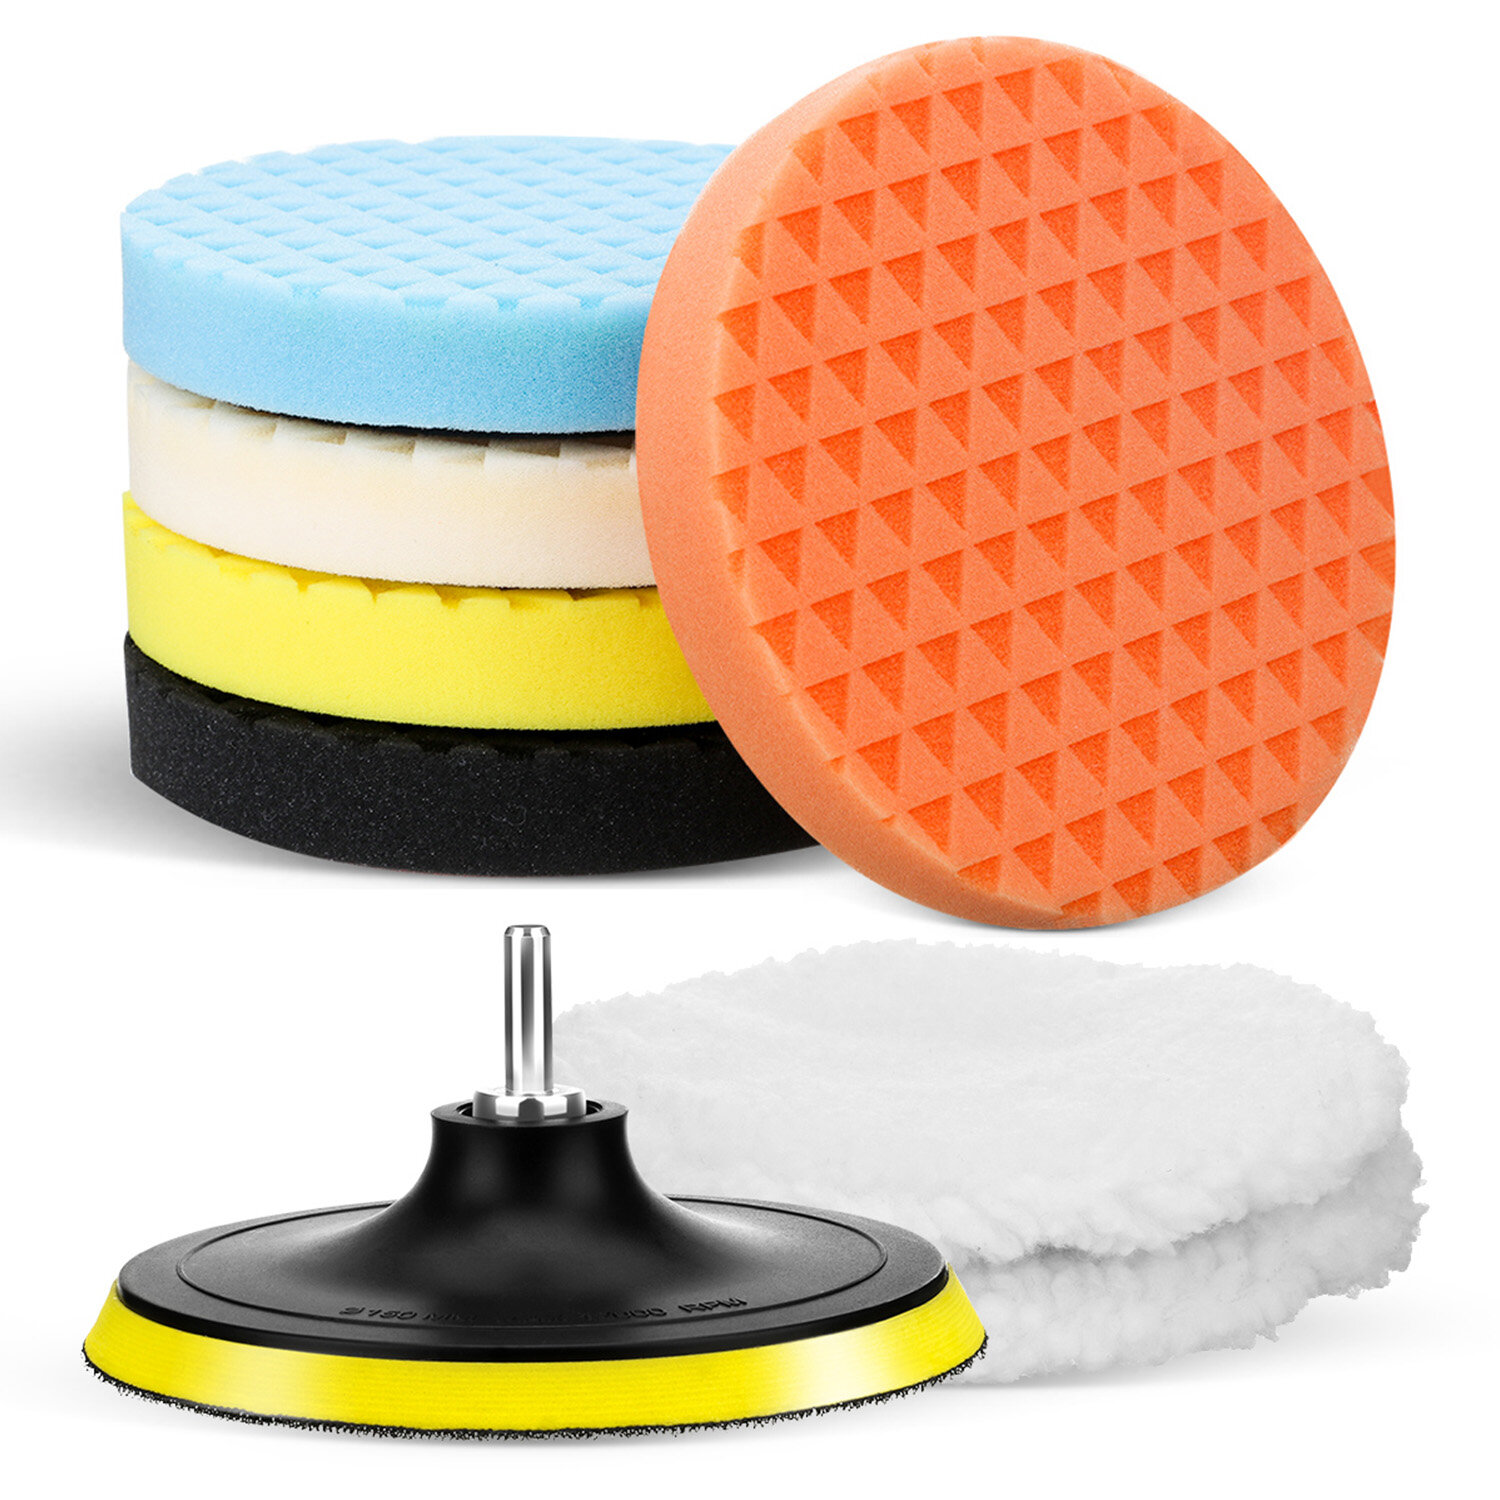 MATCC 8Pcs 6 Inch Car Polishing Pad Kit M14 Buffing Pads with Wool Bonnet Pads for Car Polisher and 